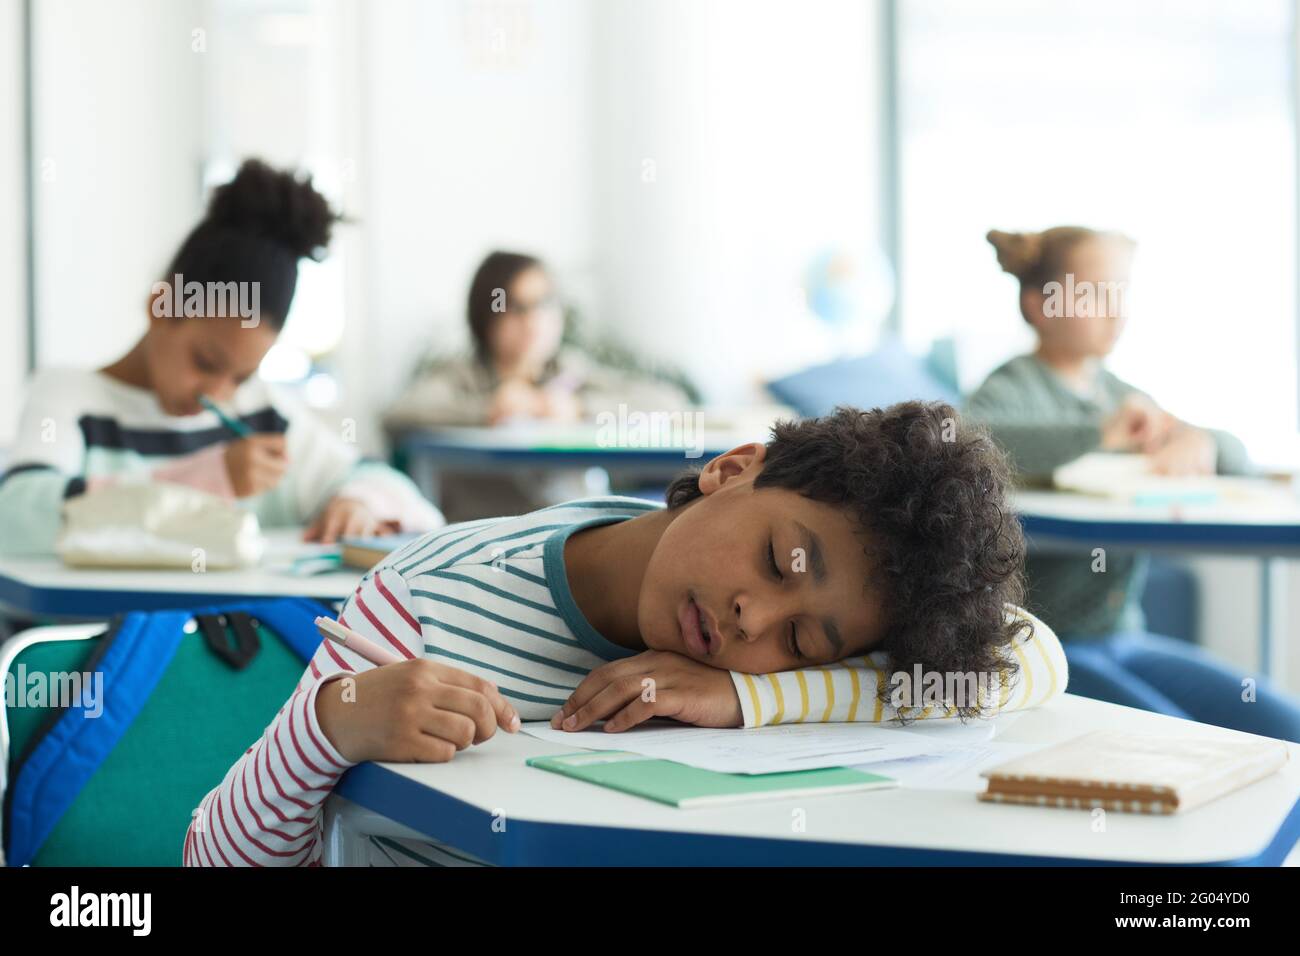 Portrait of mixed-raced boy sleeping at desk in school classroom, copy space Stock Photo